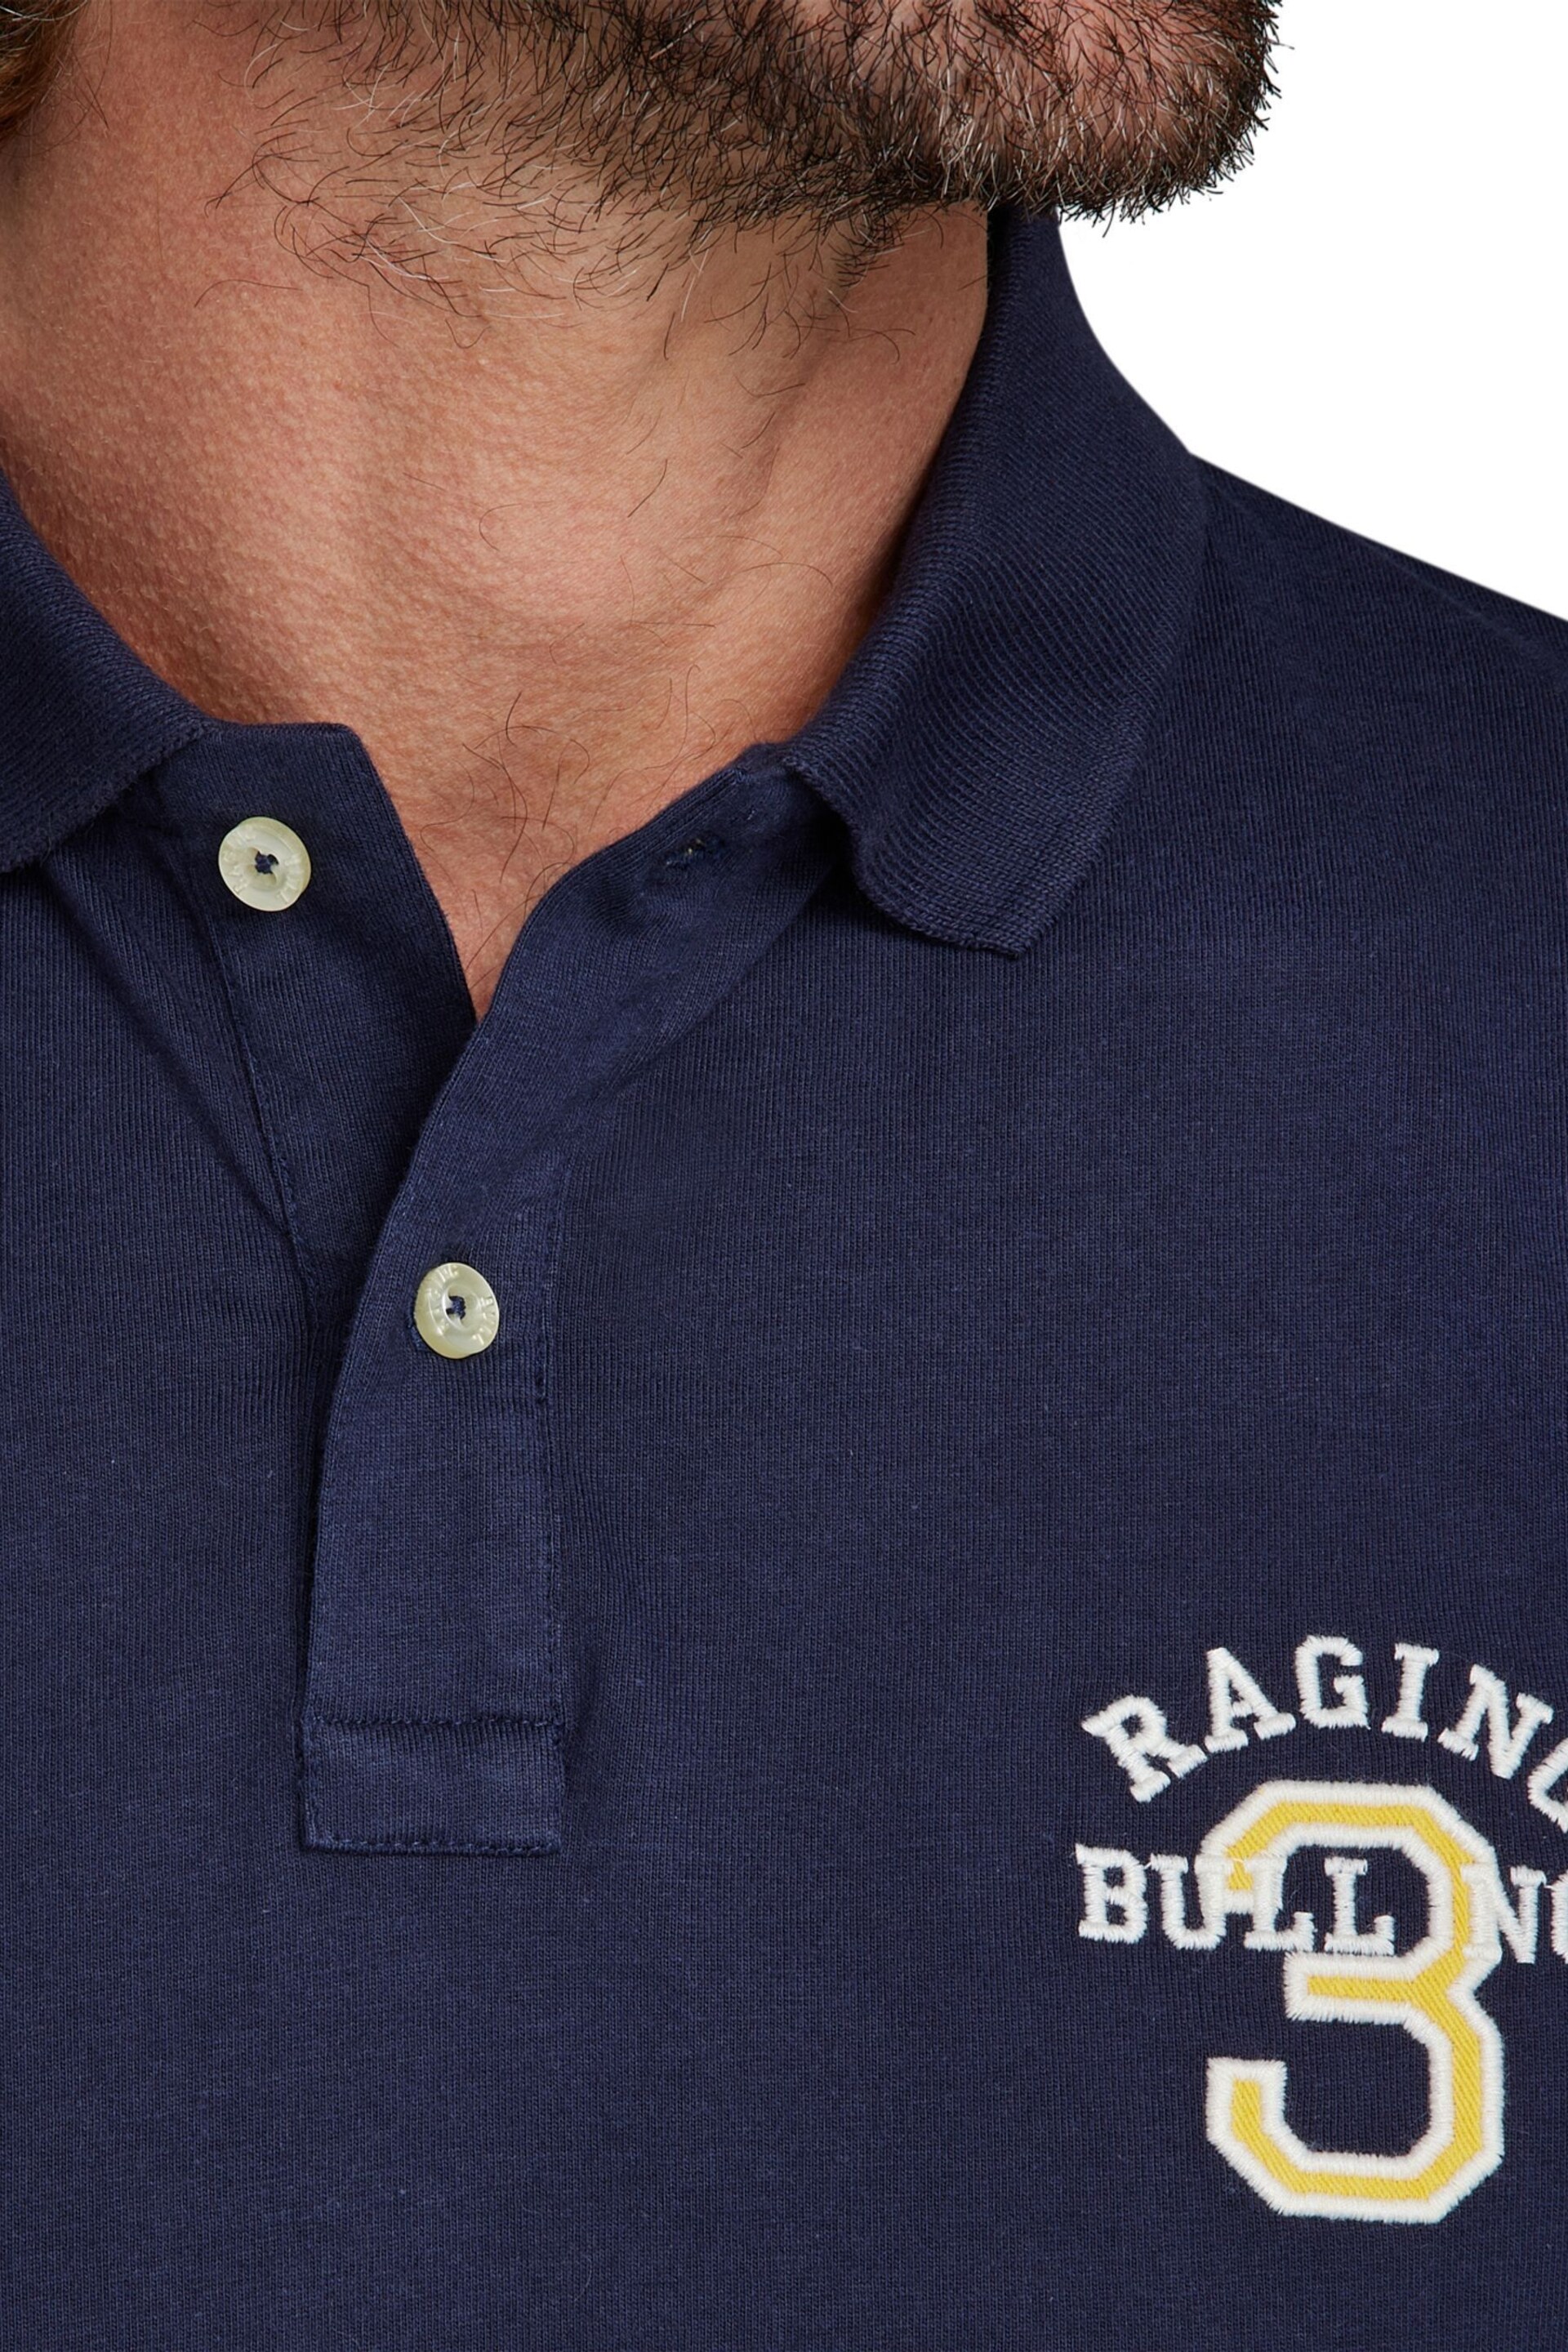 Raging Bull Blue No. 3 Jersey Polo Shirt - Image 5 of 8